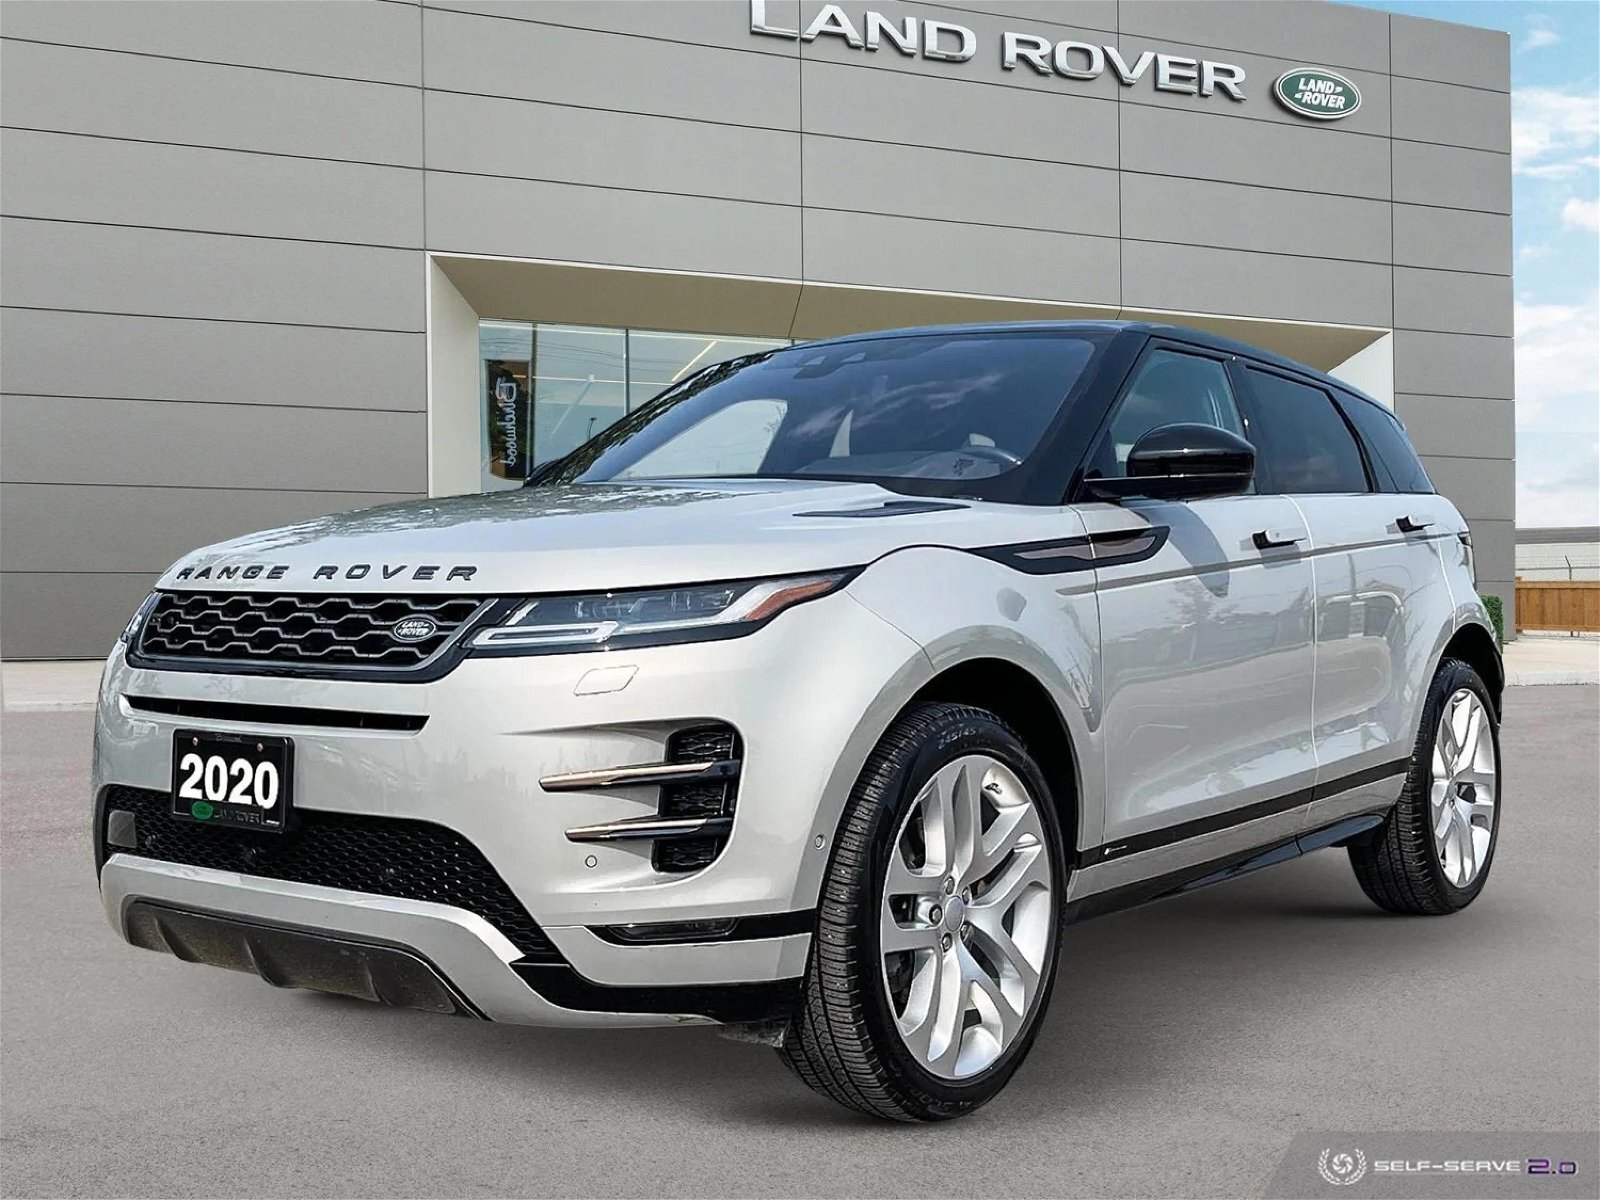 2020 Land Rover Range Rover Evoque First Edition SOLD and DELIVERED